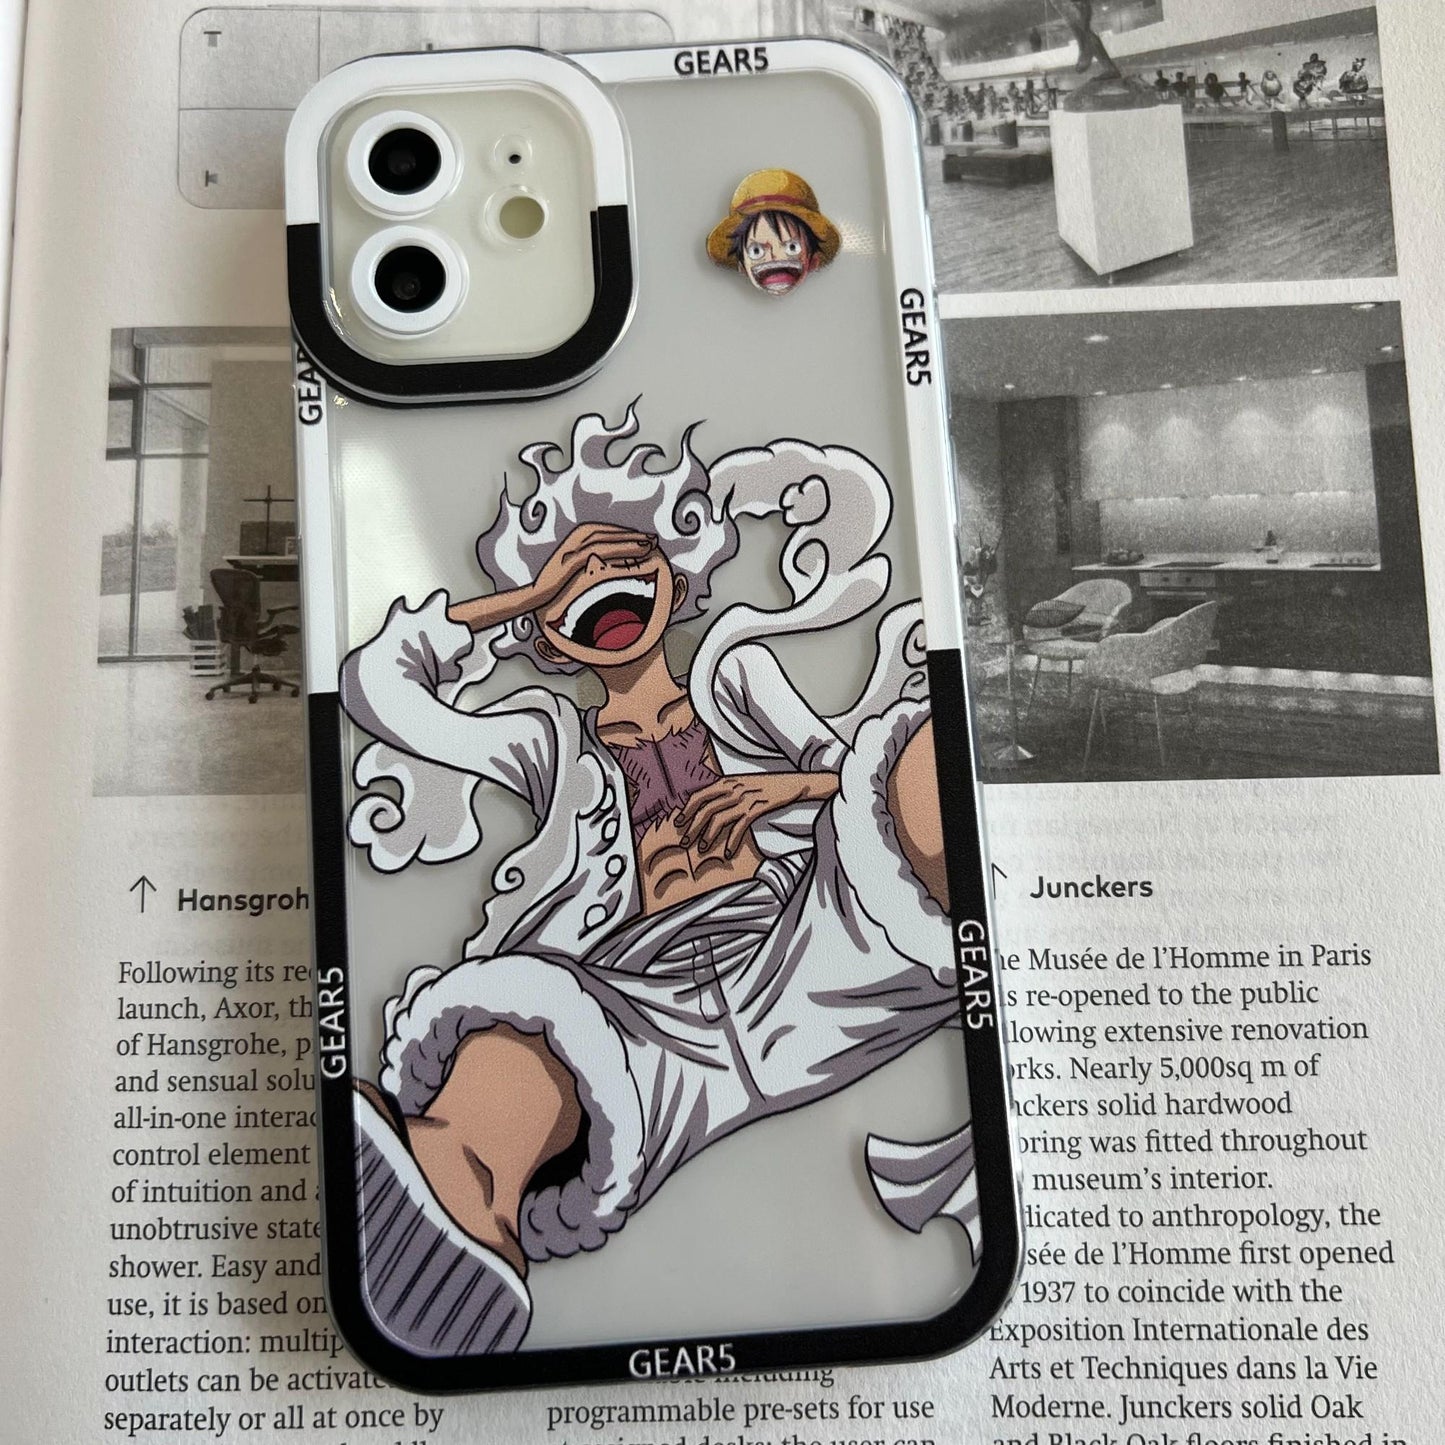 One Piece Luffy Sauron mobile phone case